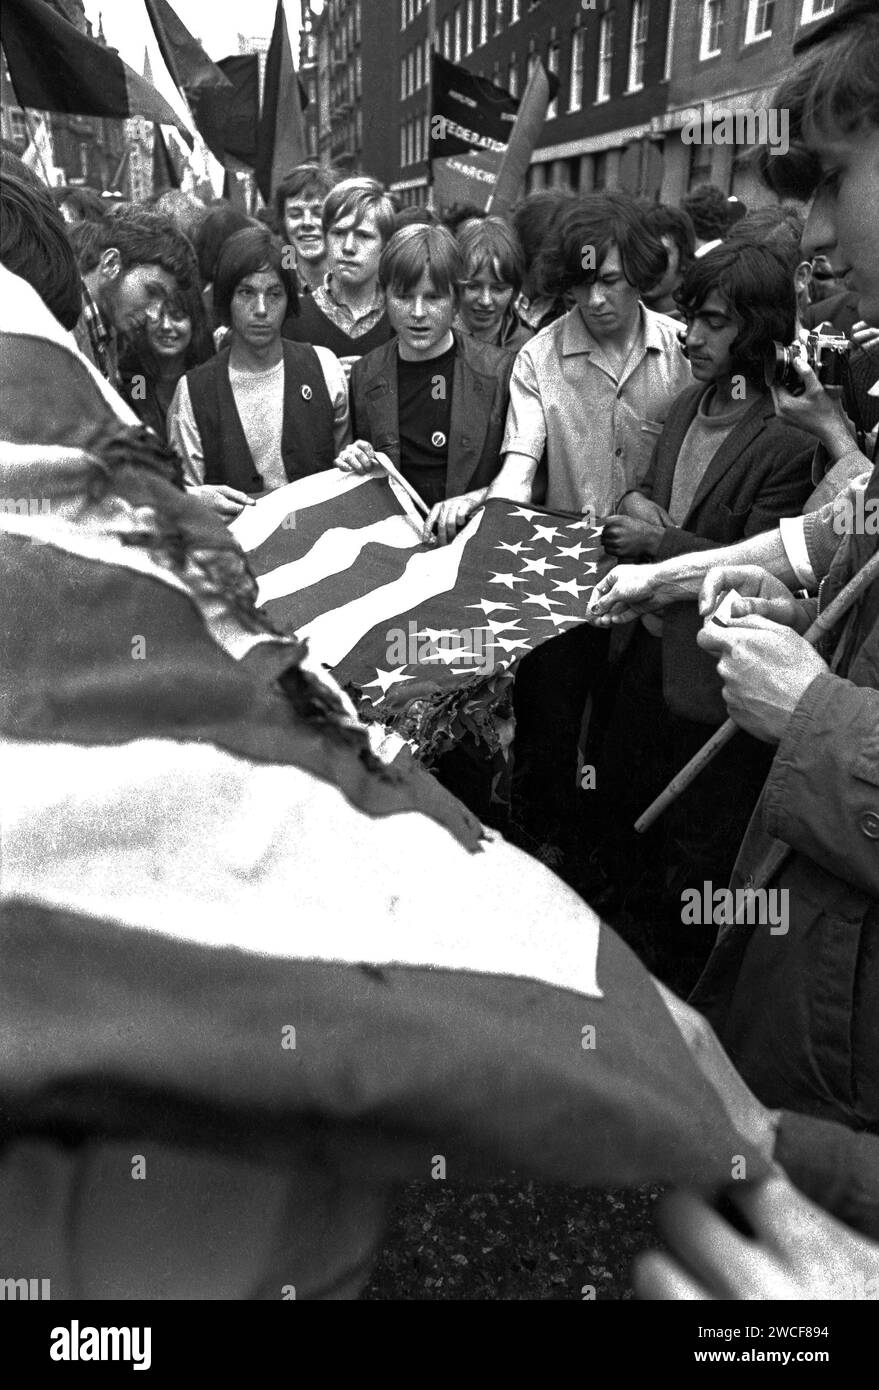 Demonstrators on Grosvenor Street in London attempting to burn an American flag near the US Embassy in Grosvenor Square at the anti-Vietnam protest march on 17th March, 1968 . Due to the violent clash between demonstrators and police this massive protest became known as 'The battle of Grosvenor Square' and was the inspiration for the Rolling Stones song, 'Street Fighting Man'. Stock Photo